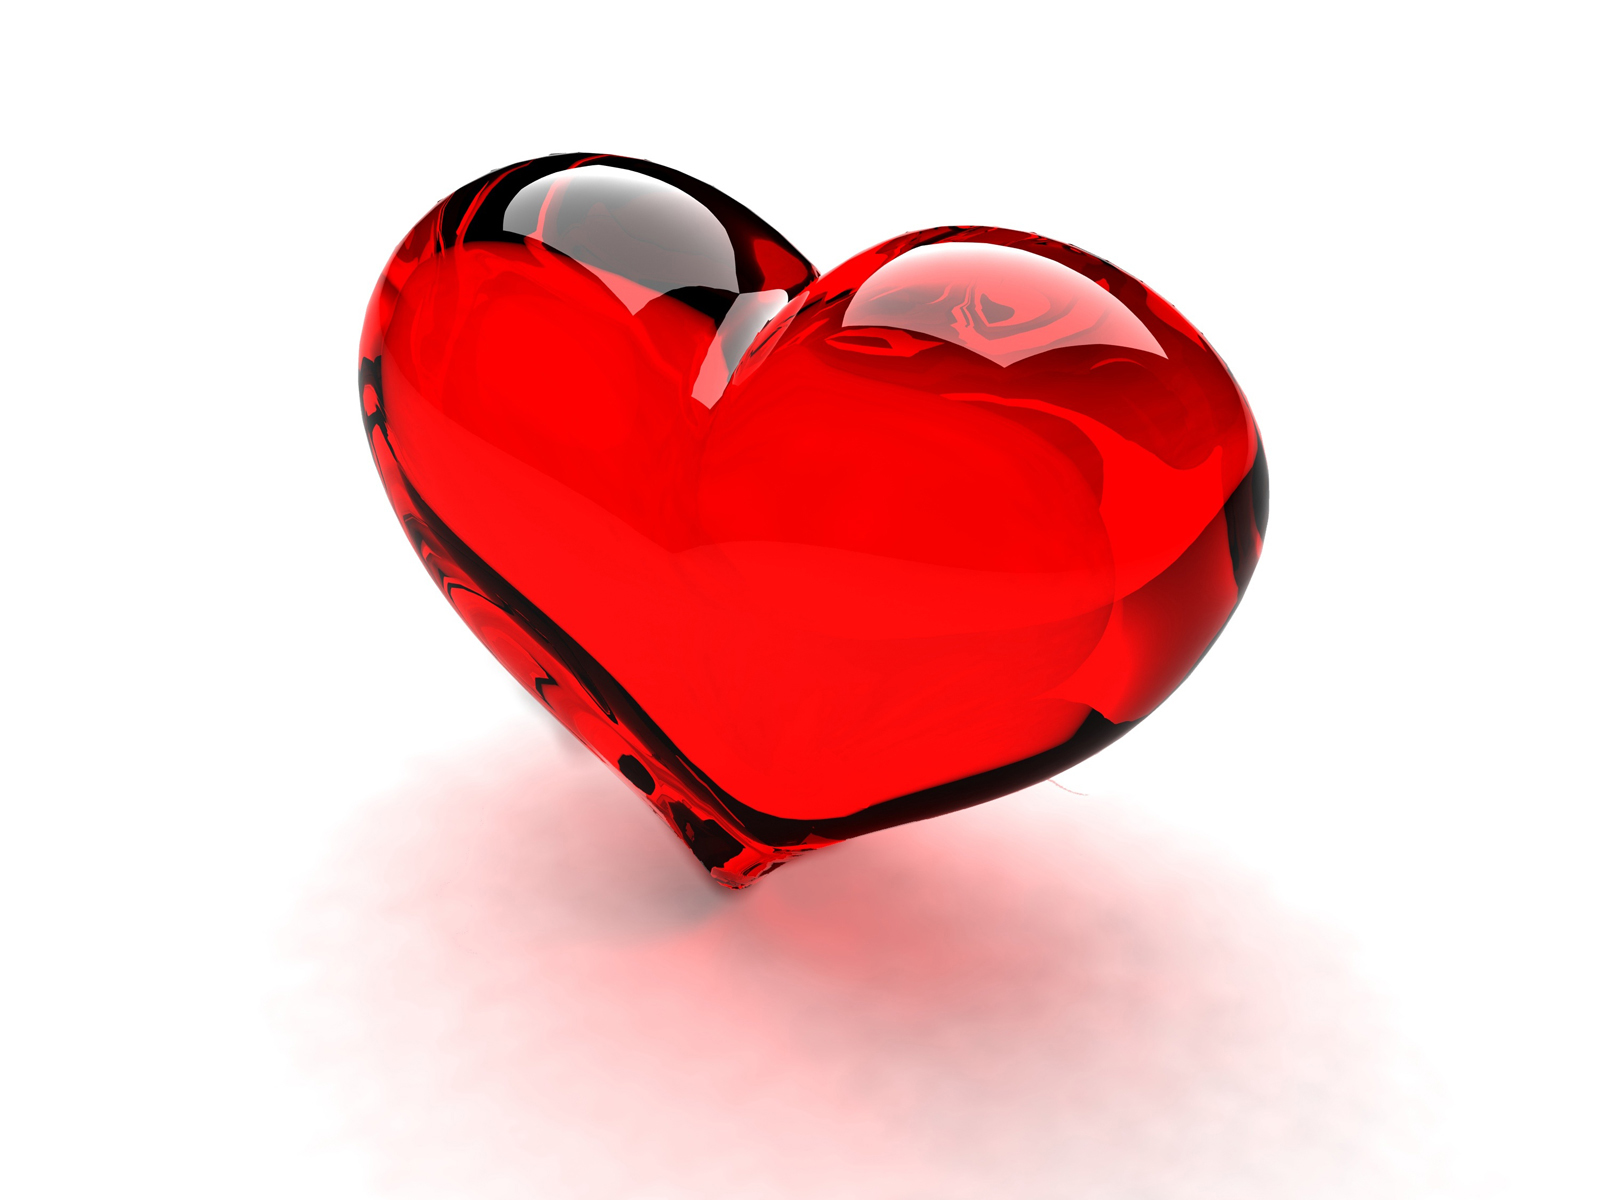 the Glass Heart Wallpapers in the category of Glass Wallpapers